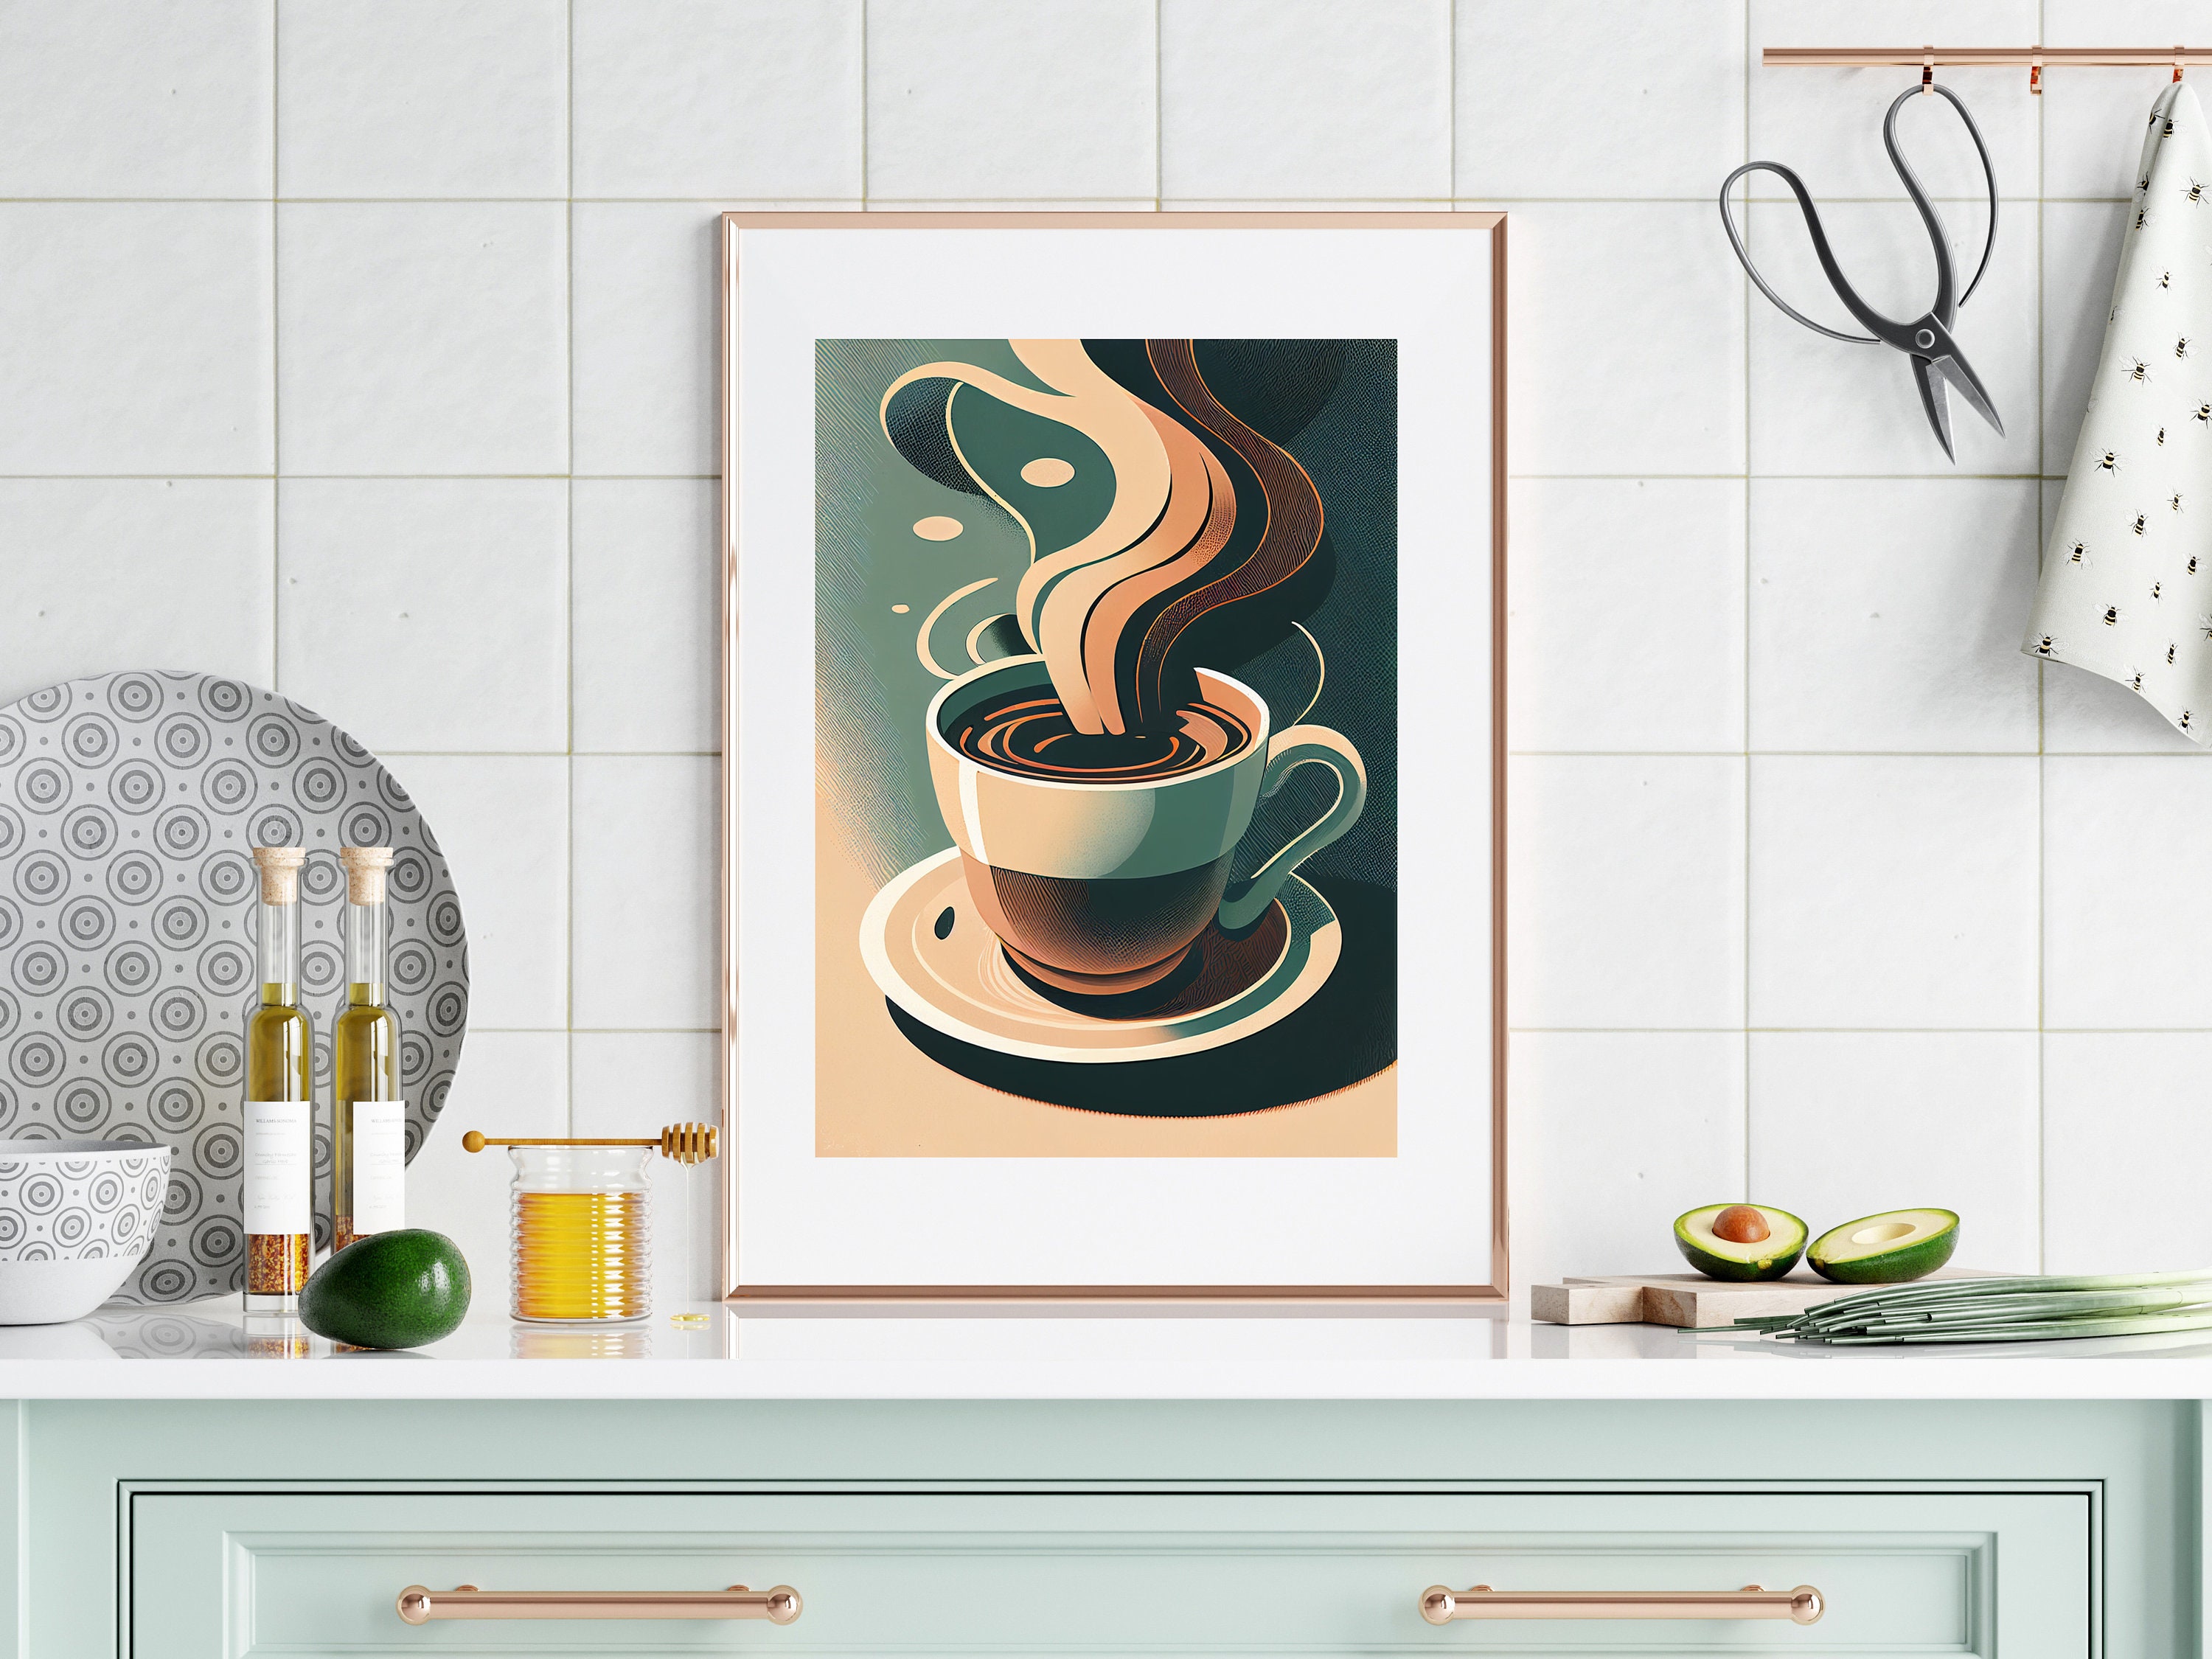  97 Decor Coffee Bar Decor - Coffee Wall Decor, Coffee Poster  Print, Coffee Bar Essentials, Coffee Cart Accessories, Eclectic Coffee Shop  Decorations, Vintage Coffee Pictures for Kitchen (UNFRAMED): Paintings